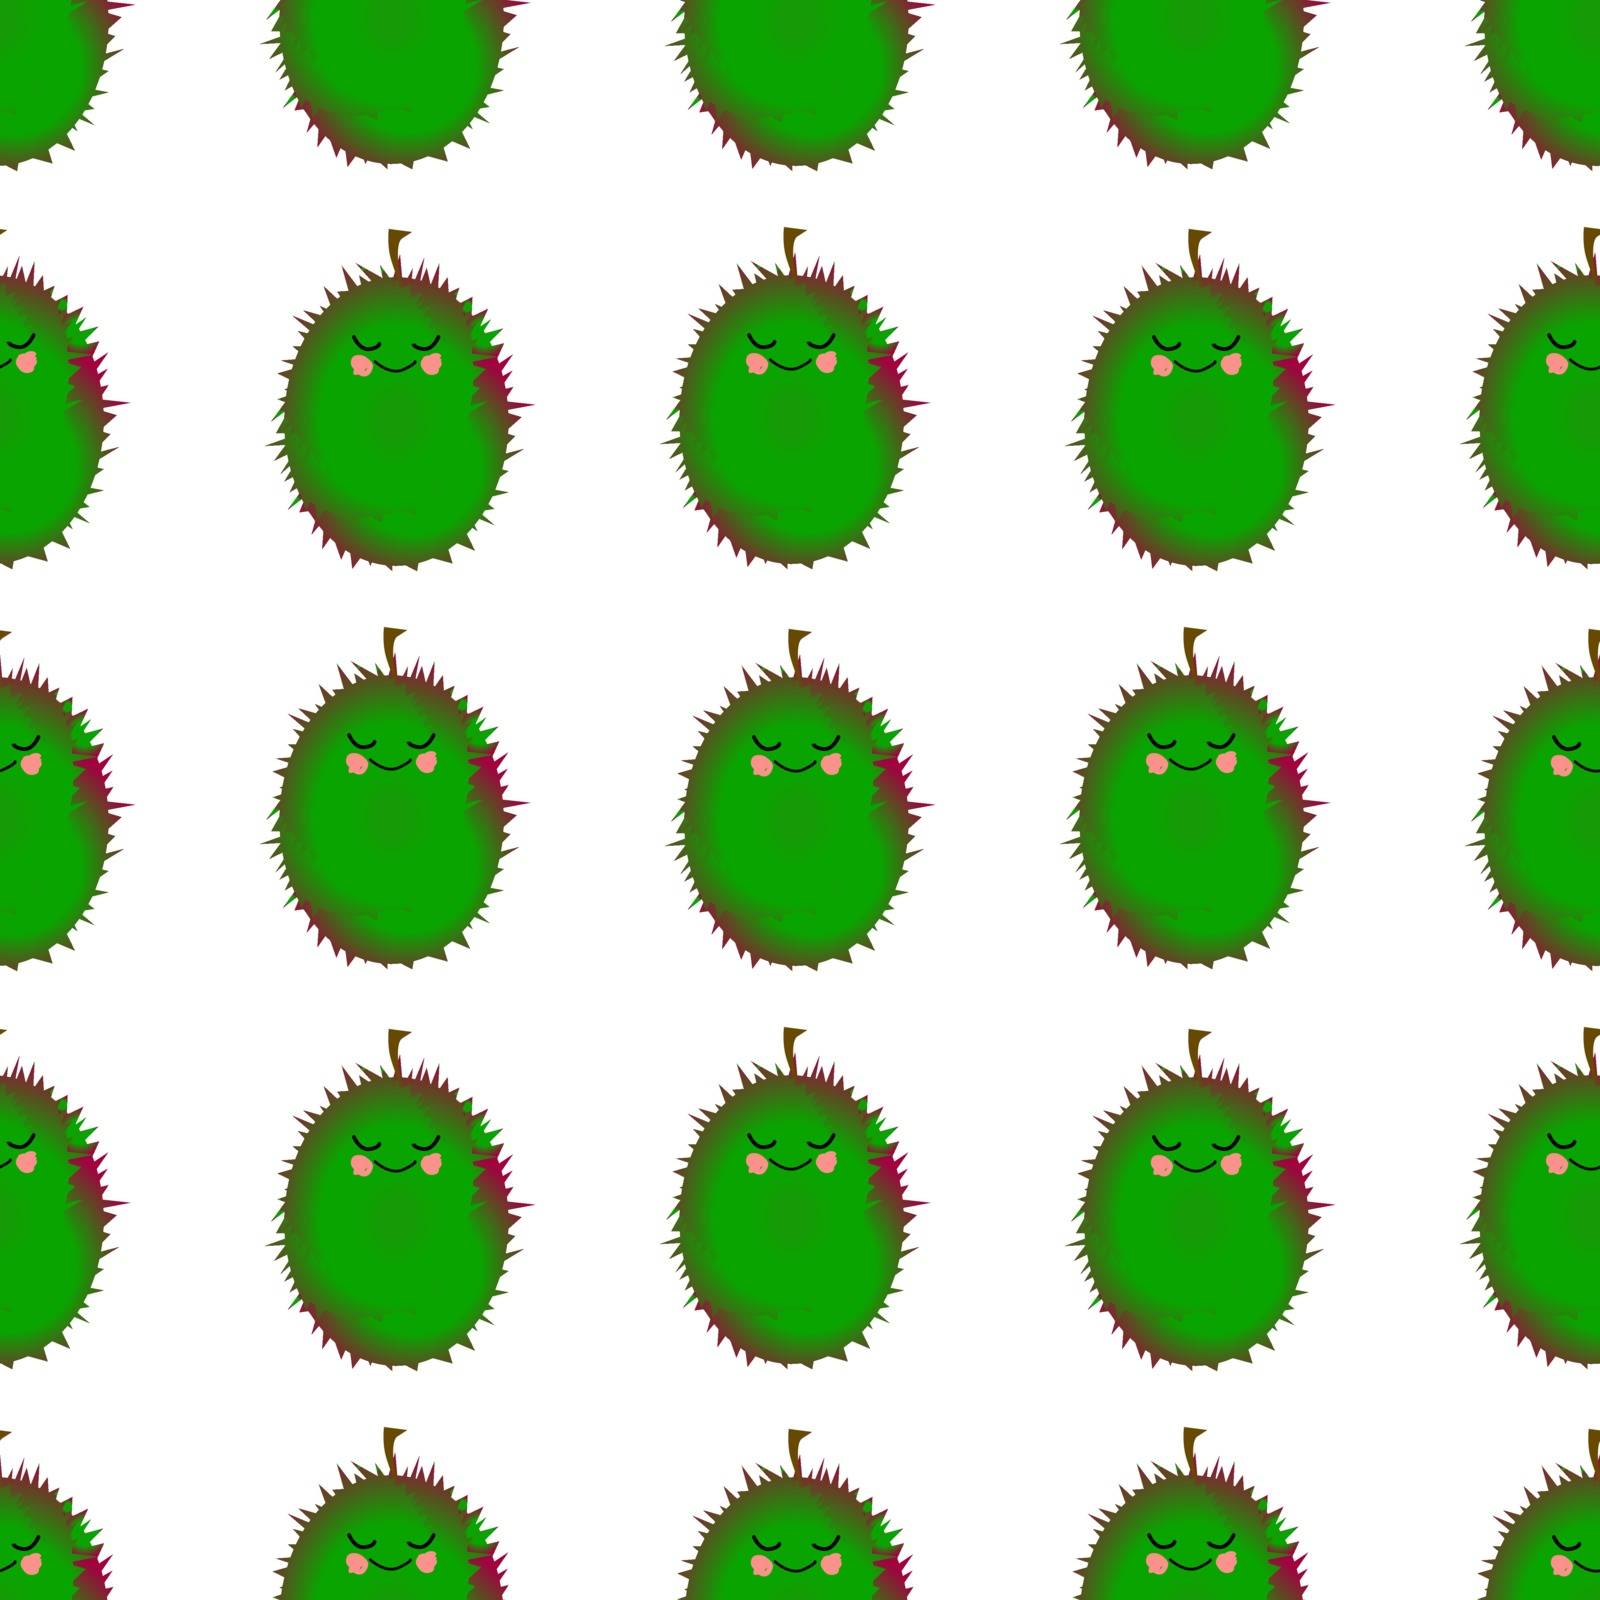 Durian Exotic fruit pattern. Vector illustration. Green Barbed